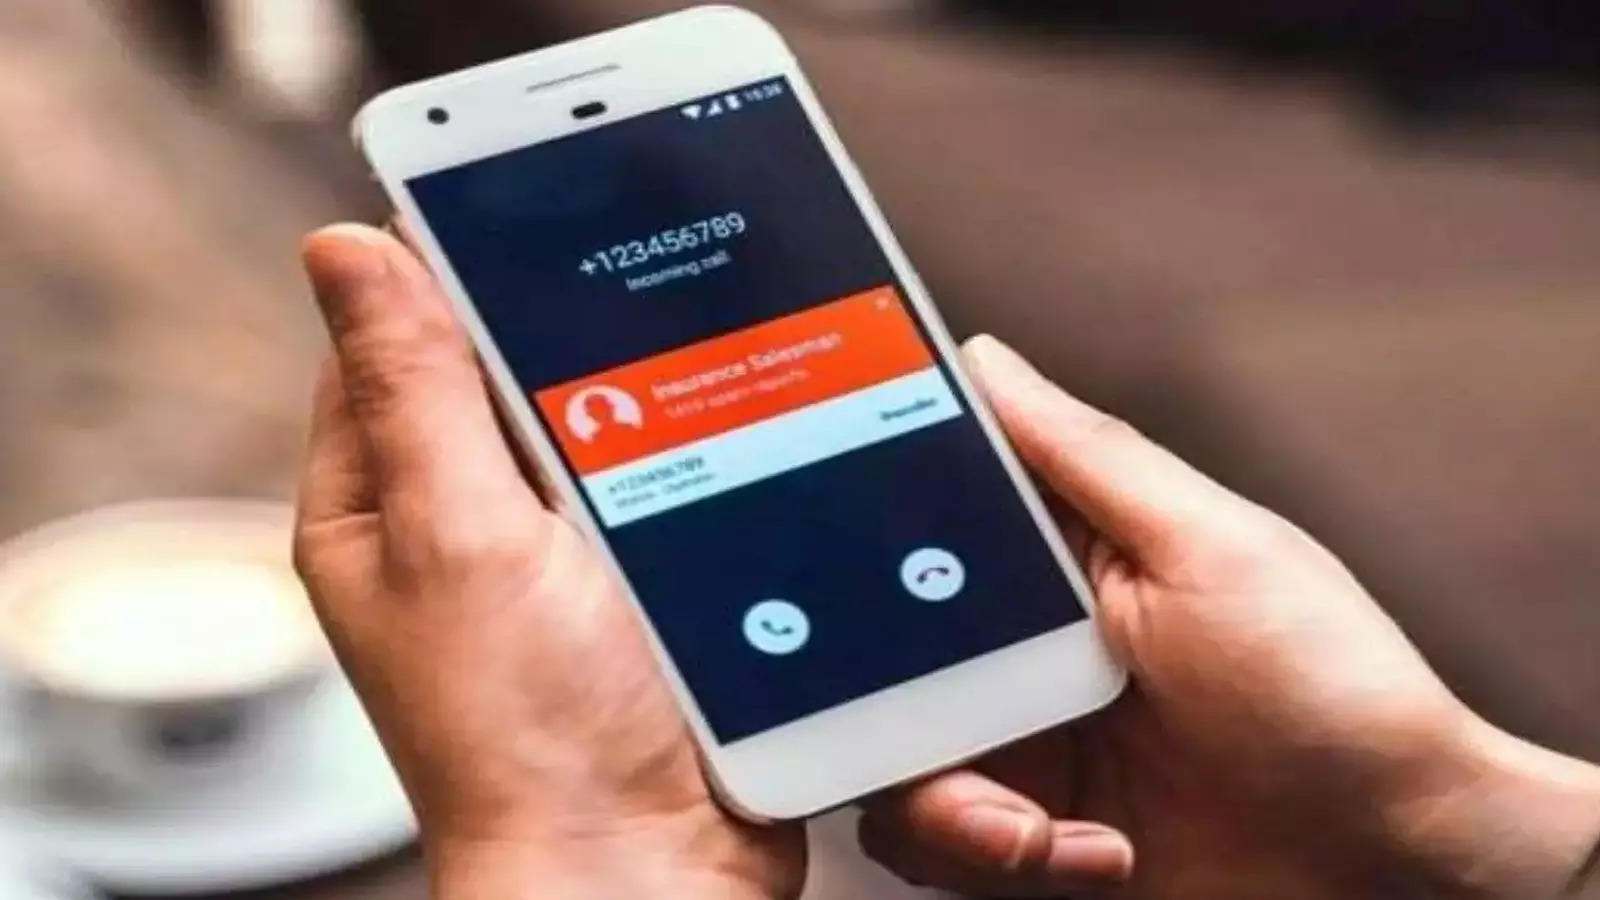 Govt extends deadline for public comments on draft guidelines to curb spam calls, msgs till Aug 8 